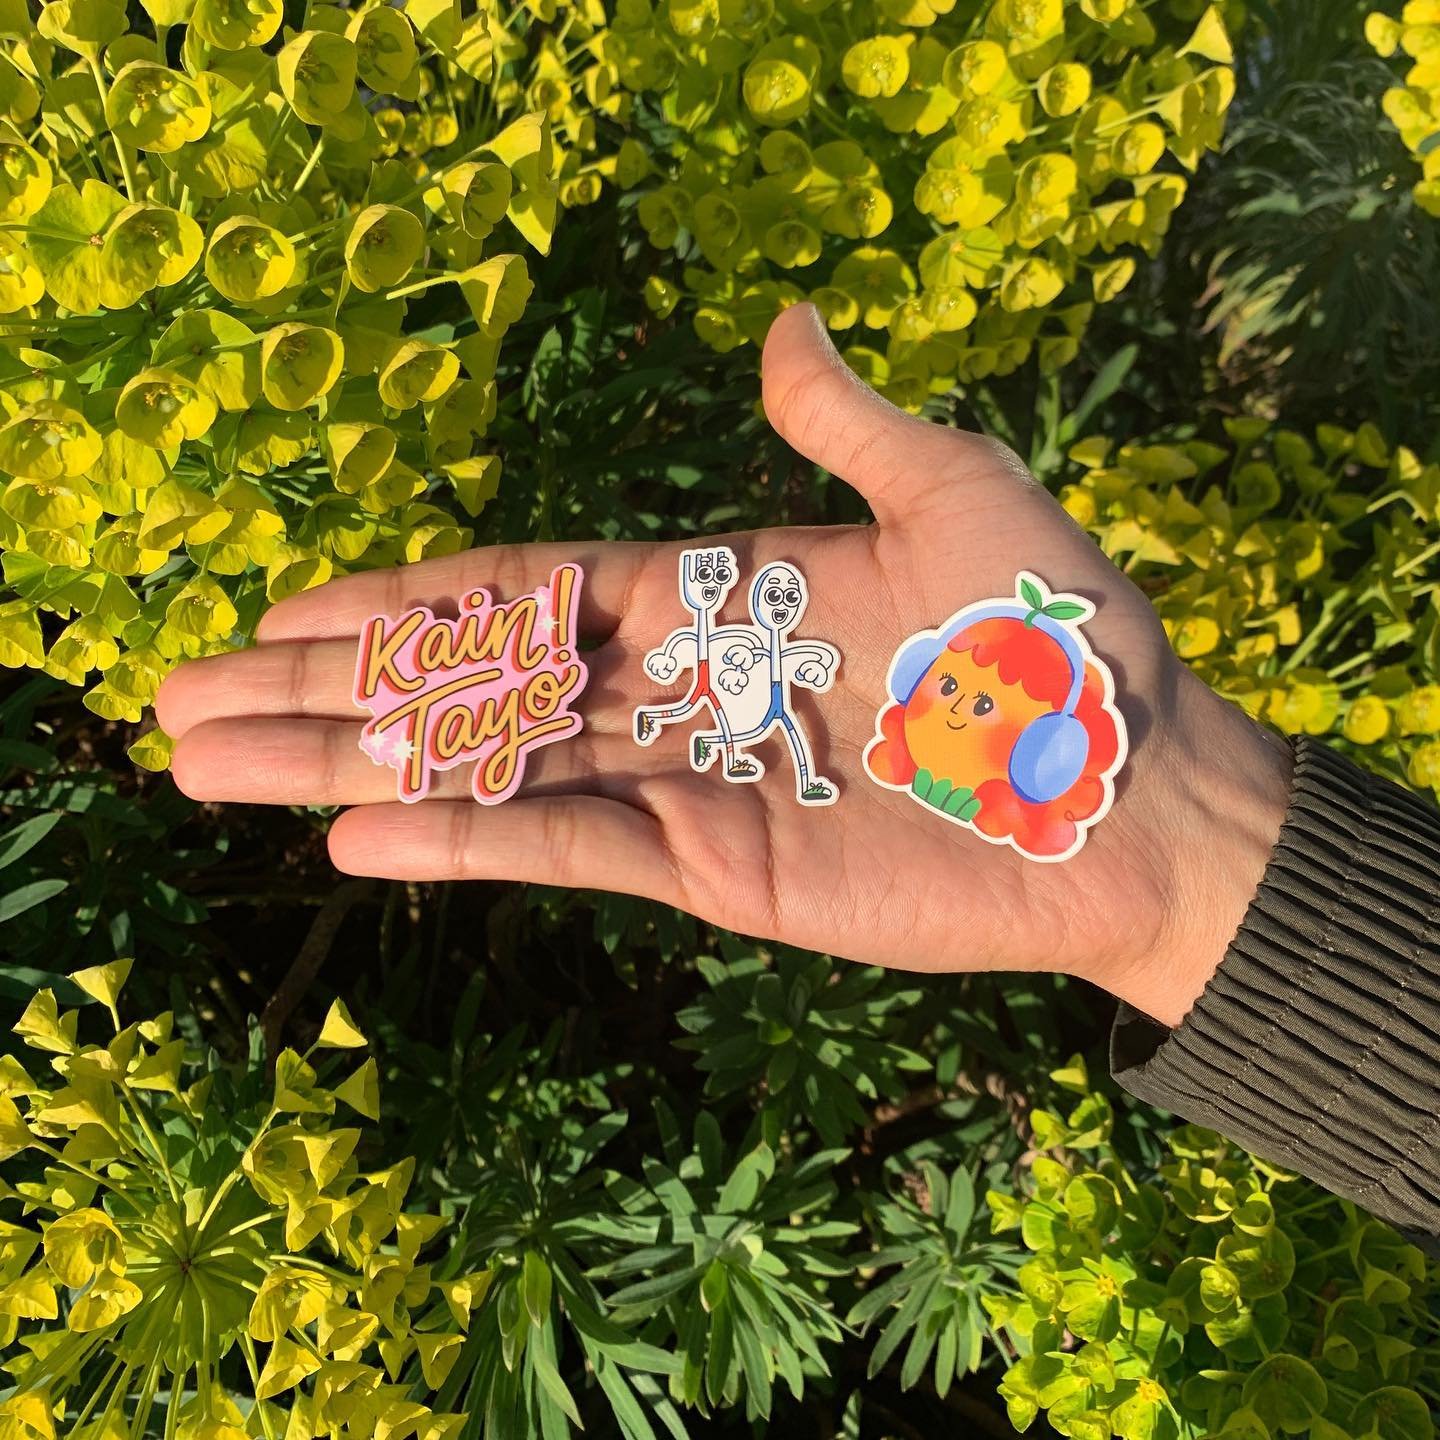 I made stickers for the first time!!! ✨💖 So happy with how these turned out 🥰 and grateful for the best hand model 😝

Come grab one at my upcoming markets this year! 🫶🏼🫶🏼